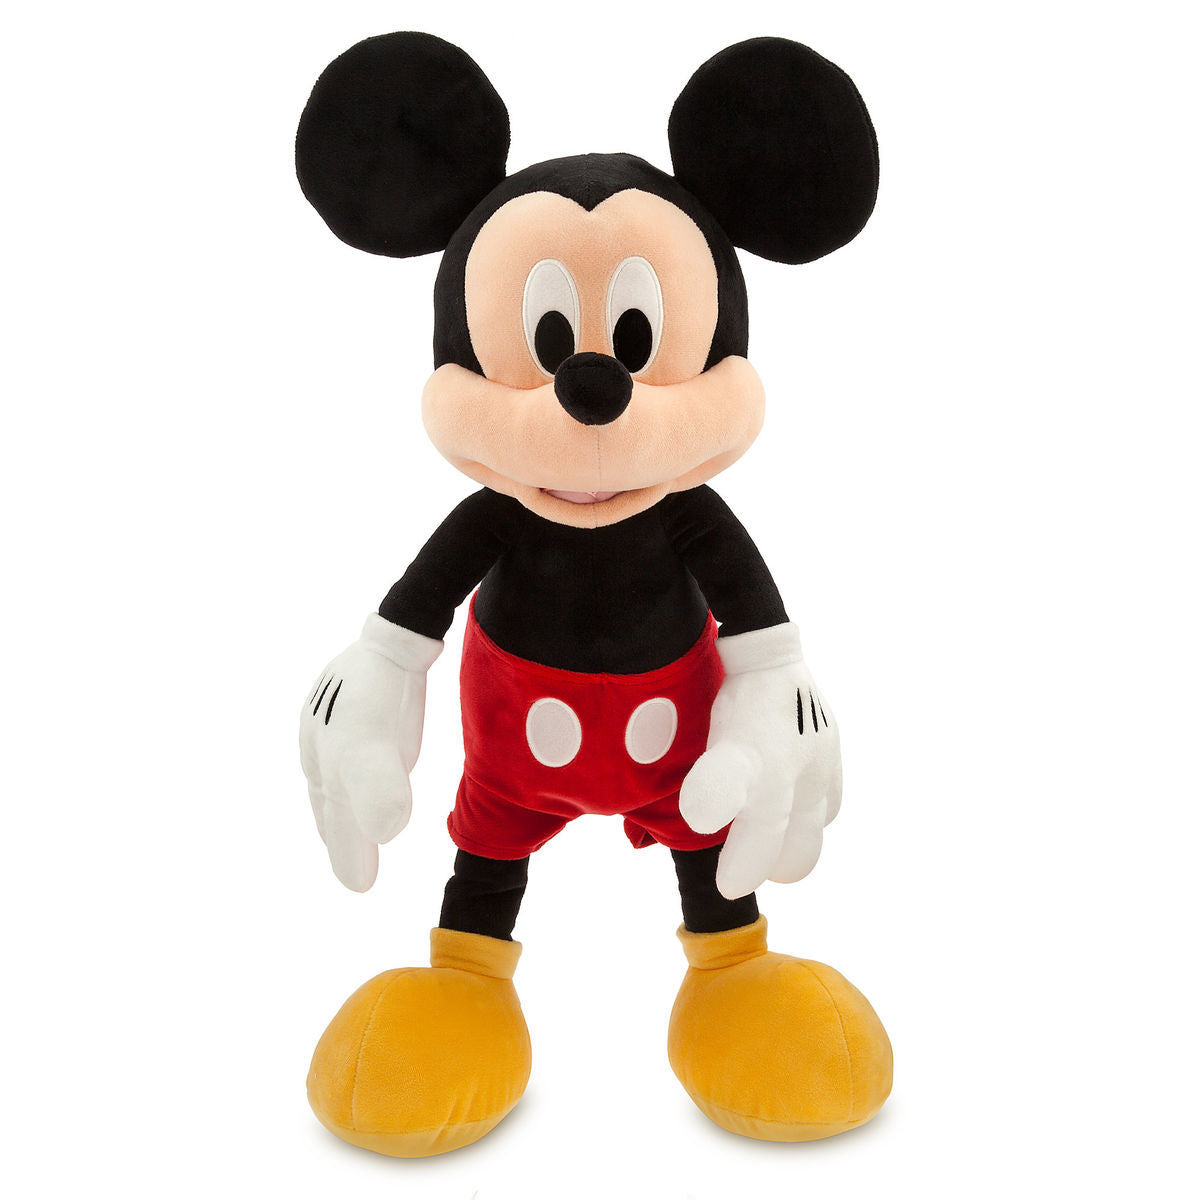 Disney Mickey Mouse Large Plush New with Tags